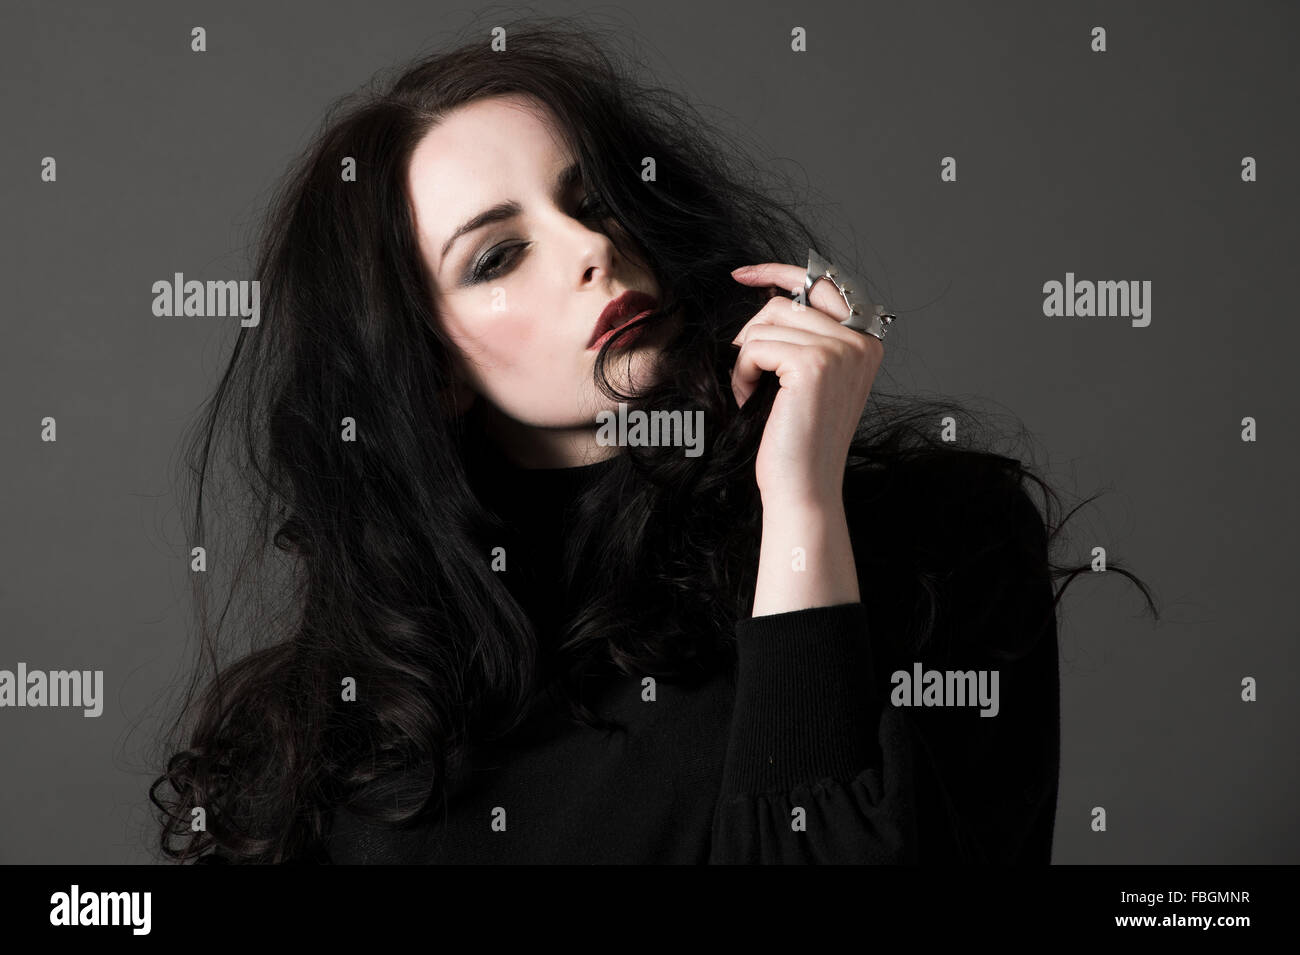 Beautiful female fashion model portrait with dark hair, pale skin, gothic looking Stock Photo